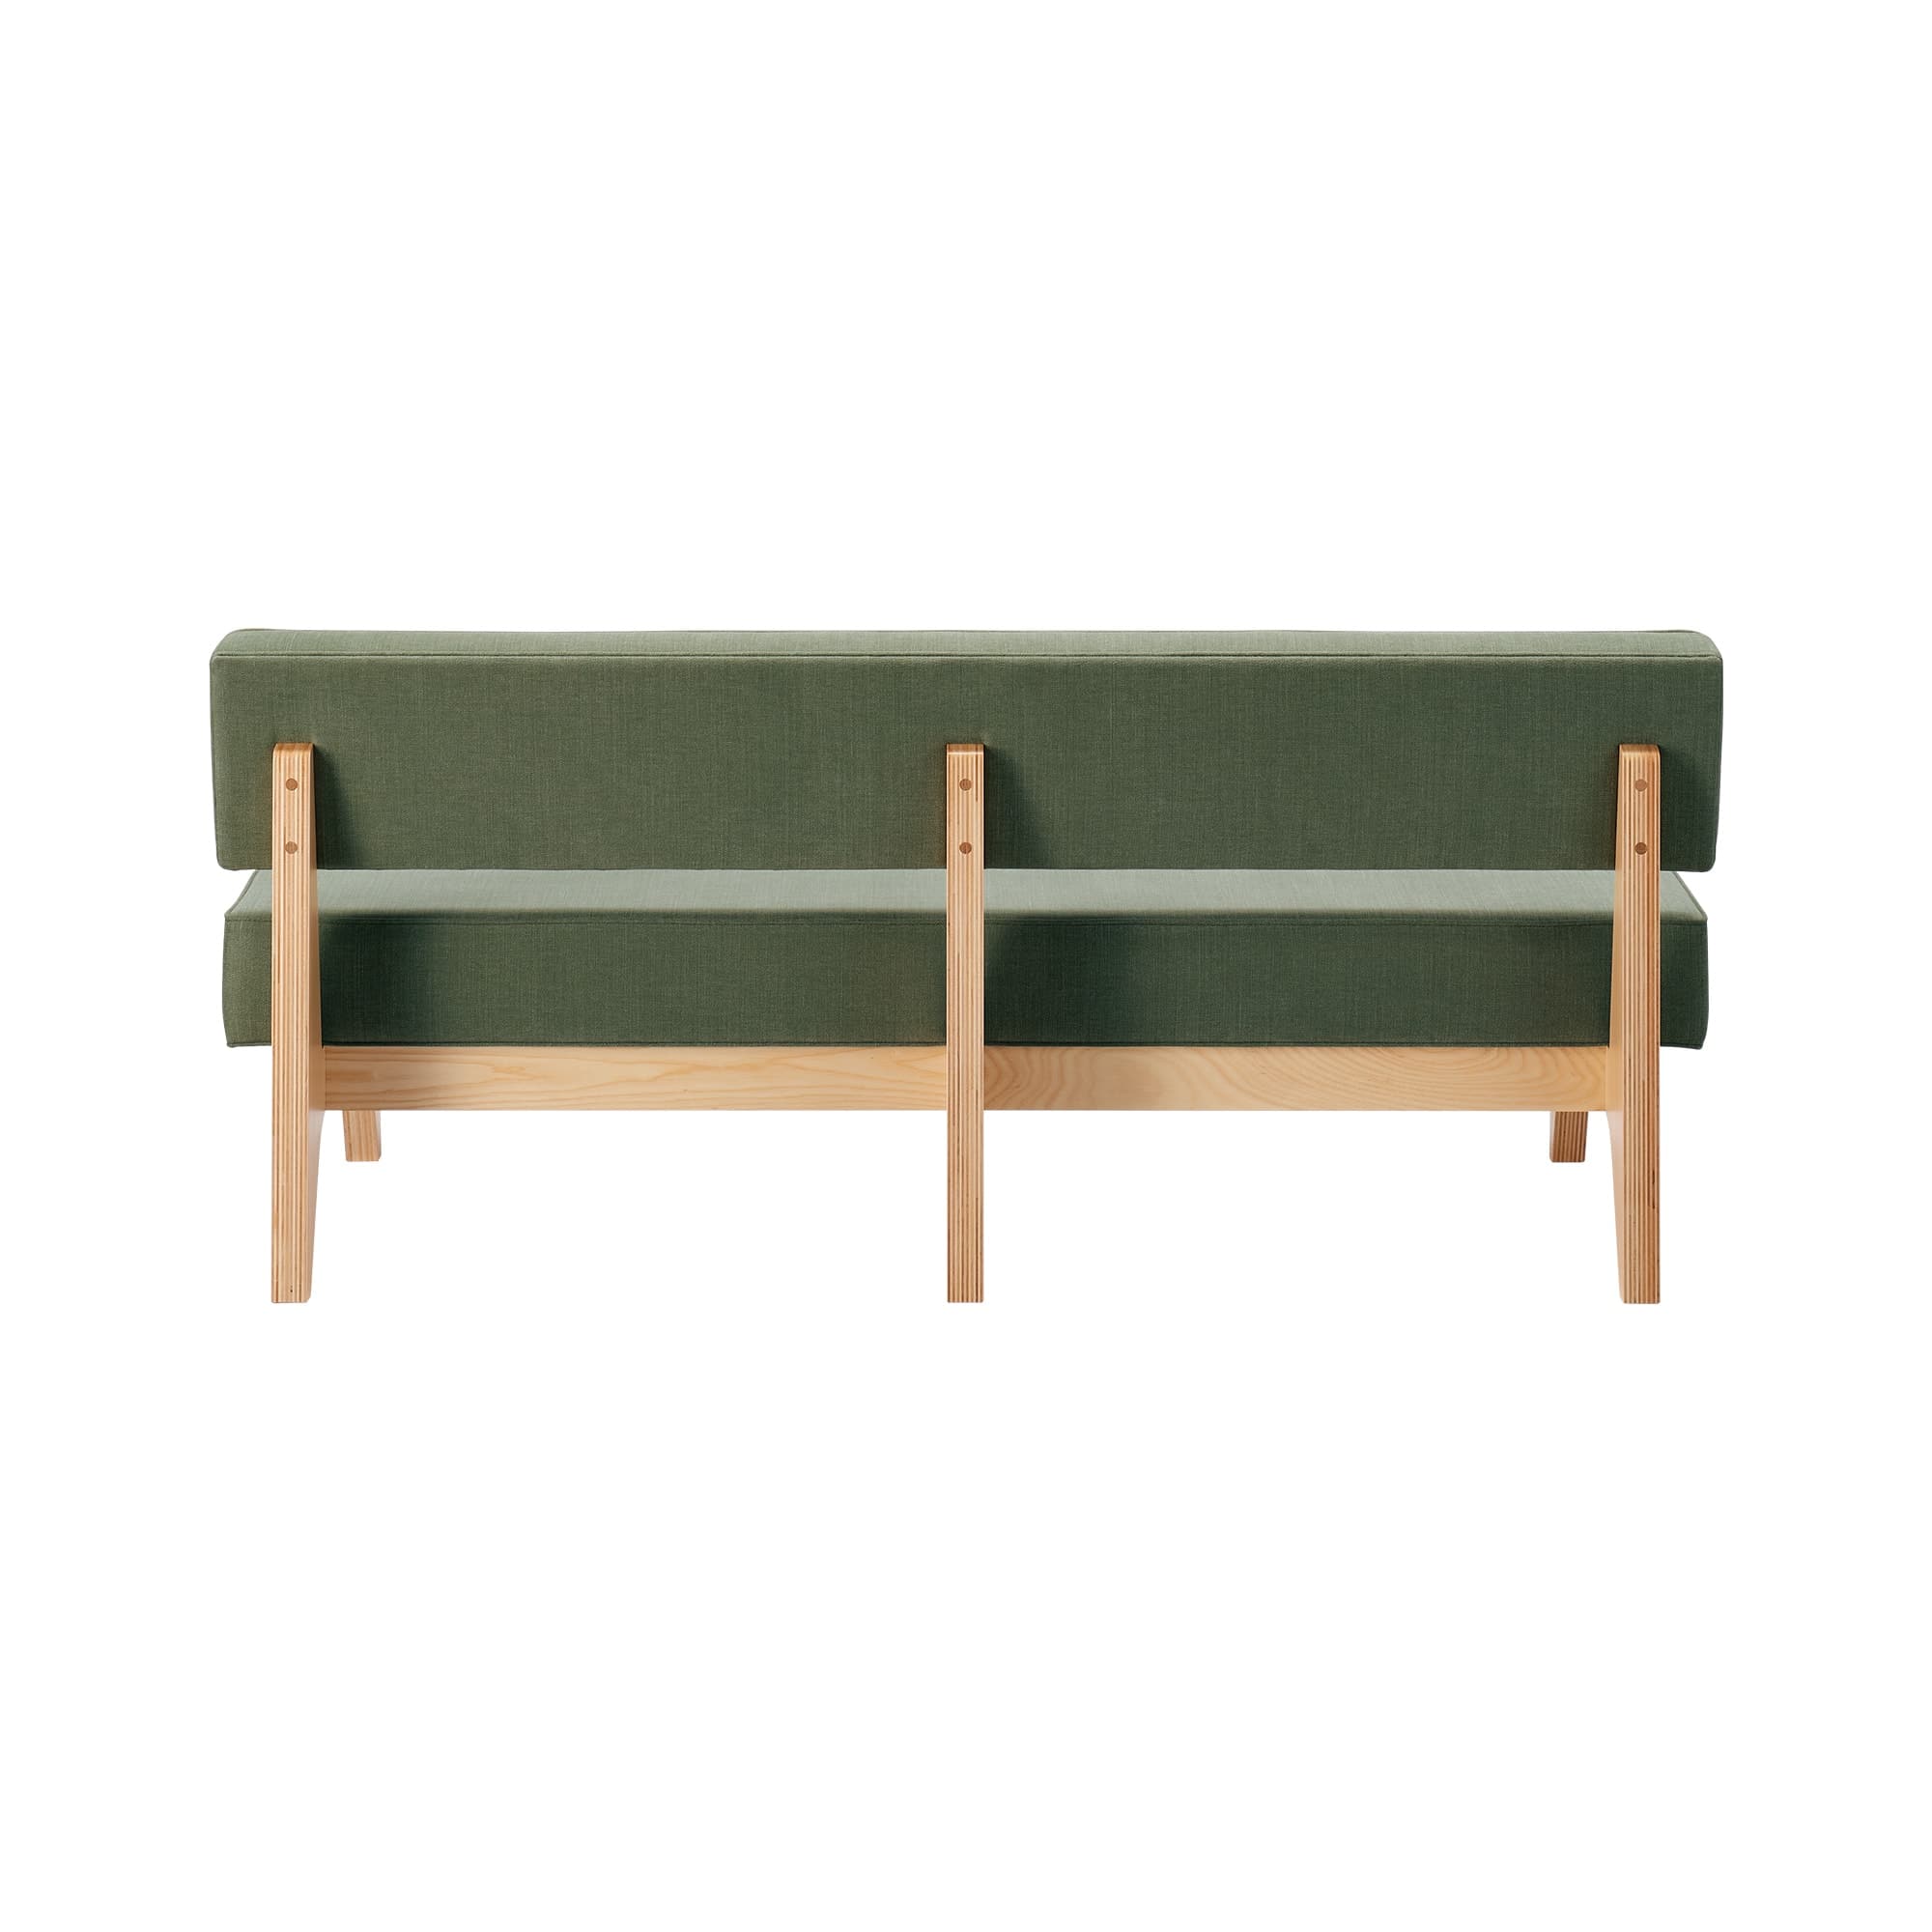 Idee Shop Online 在庫品 Solid Bench Taupe ソファ